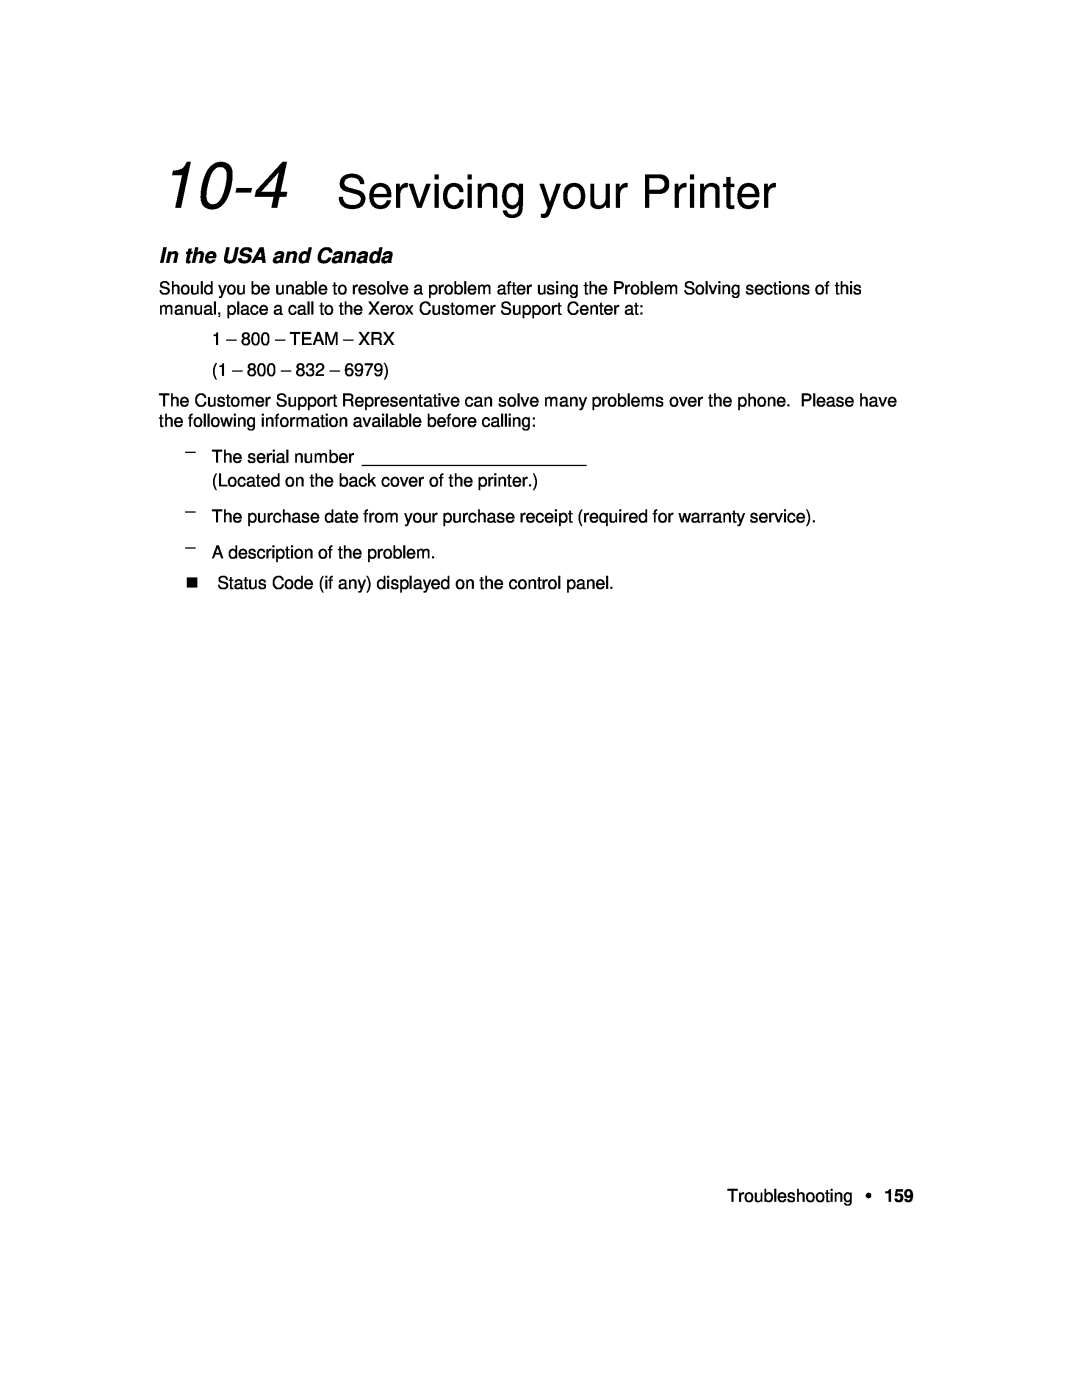 Xerox P12 manual Servicing your Printer, In the USA and Canada 